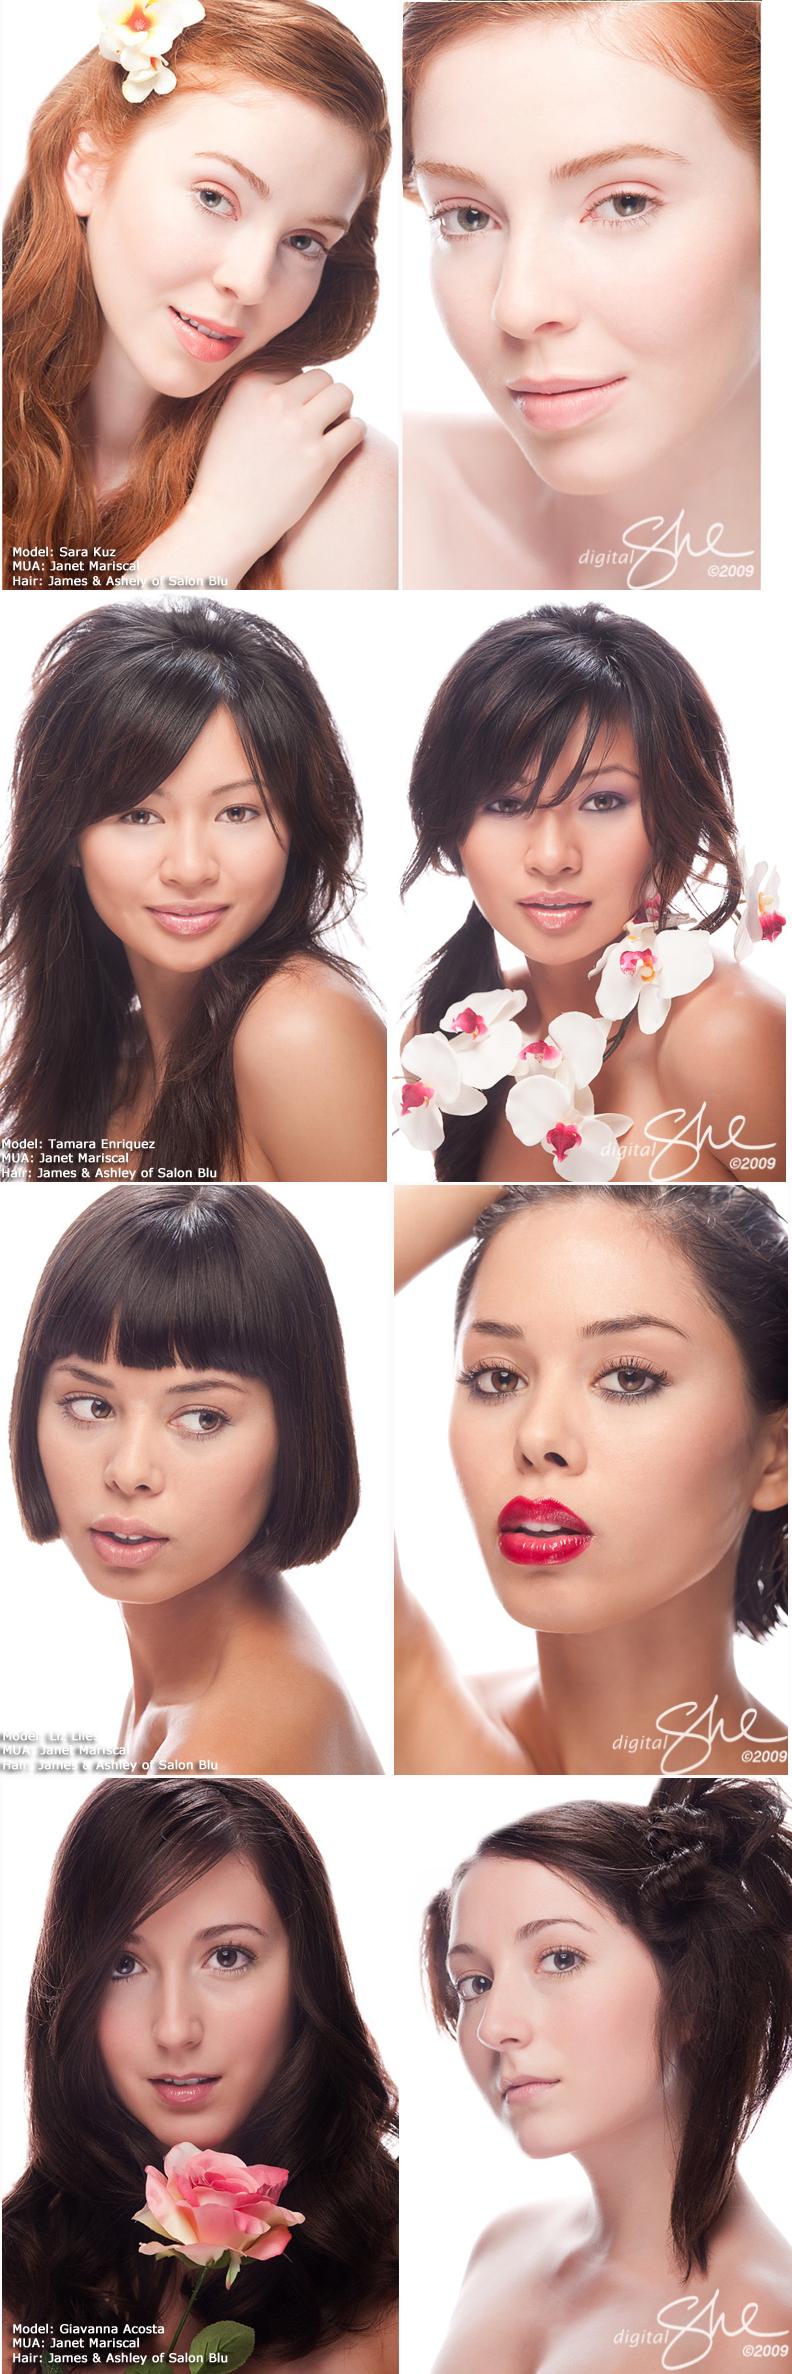 Female model photo shoot of JANET MARISCAL, Gia, maraenriquez, liz liles and Sara Kuz by digitalShe in sweetlights studio sf, hair styled by Salon Blu and BBB